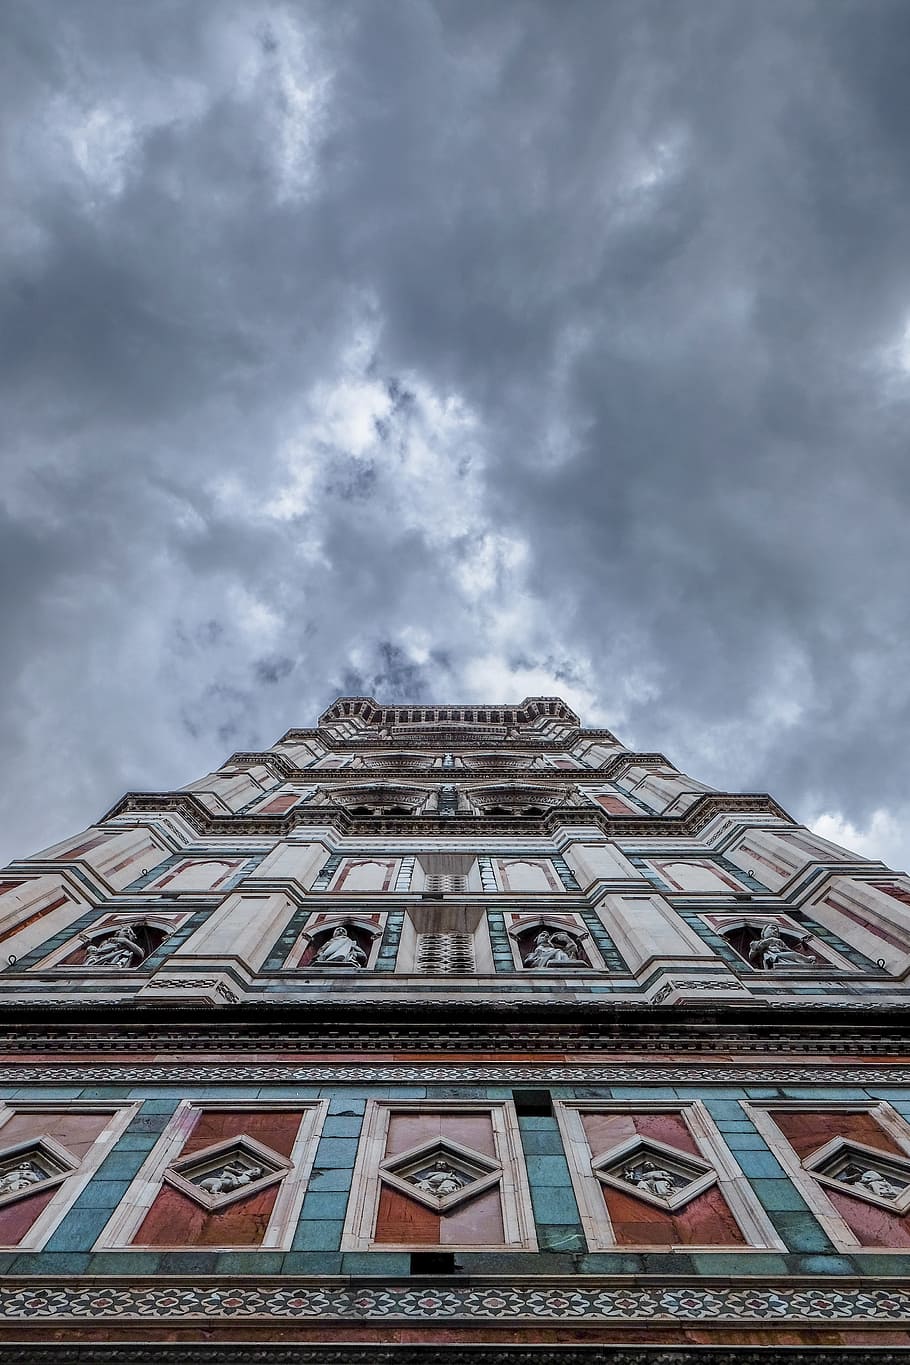 firenze, cathedral, duomo, tower, air, clouds, architecture, building, monument, renaissance